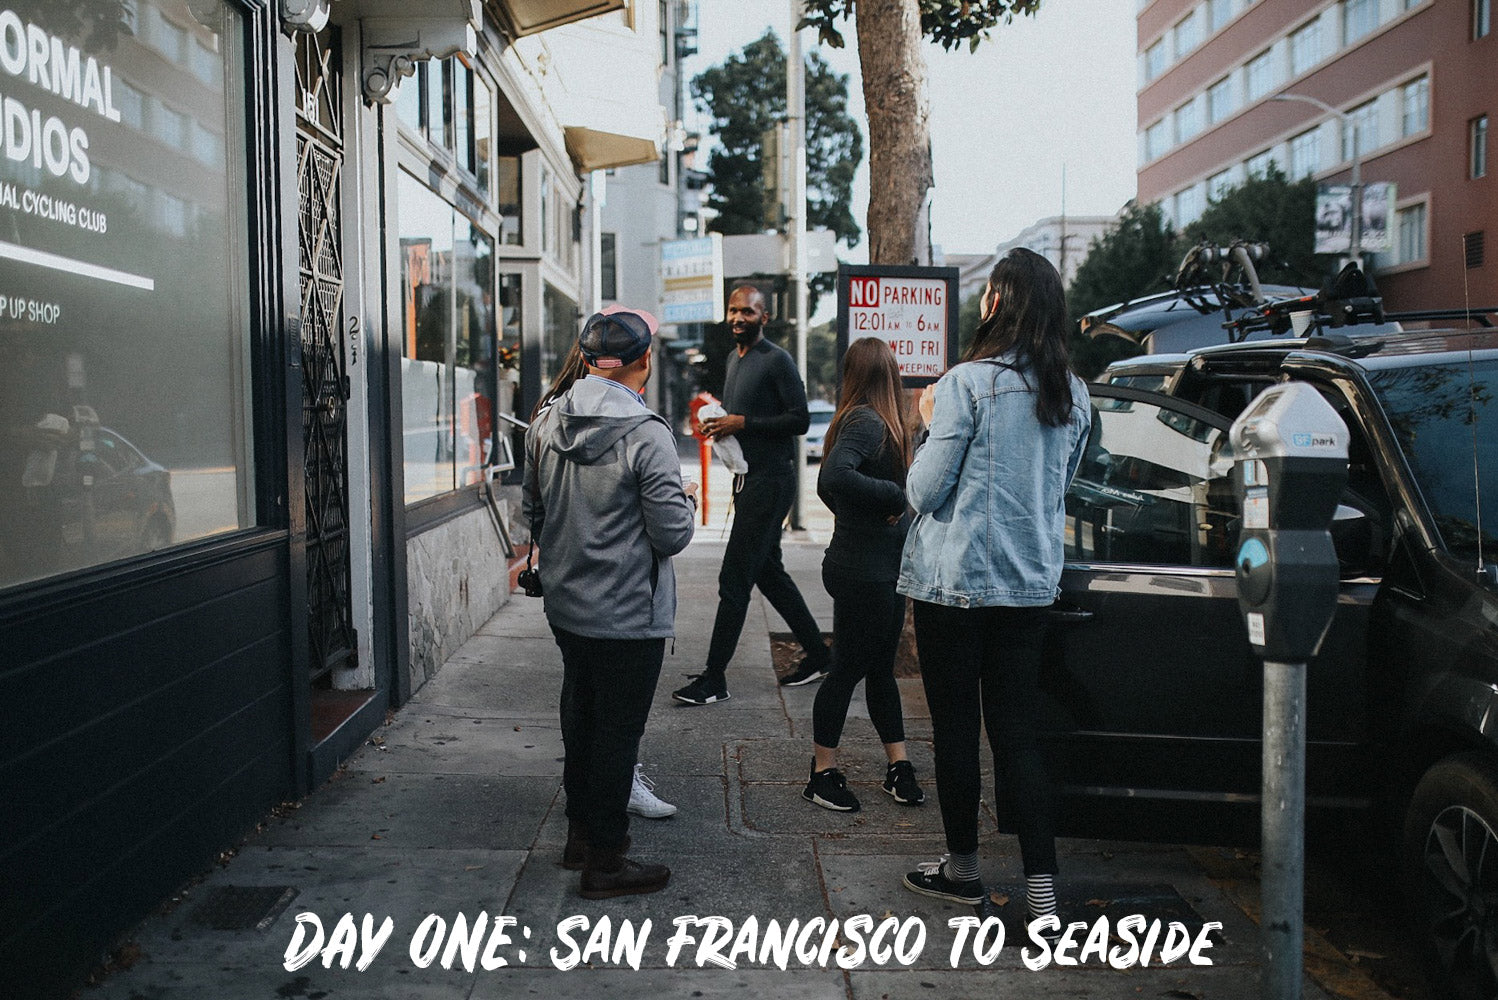 Day One: San Francisco to Seaside